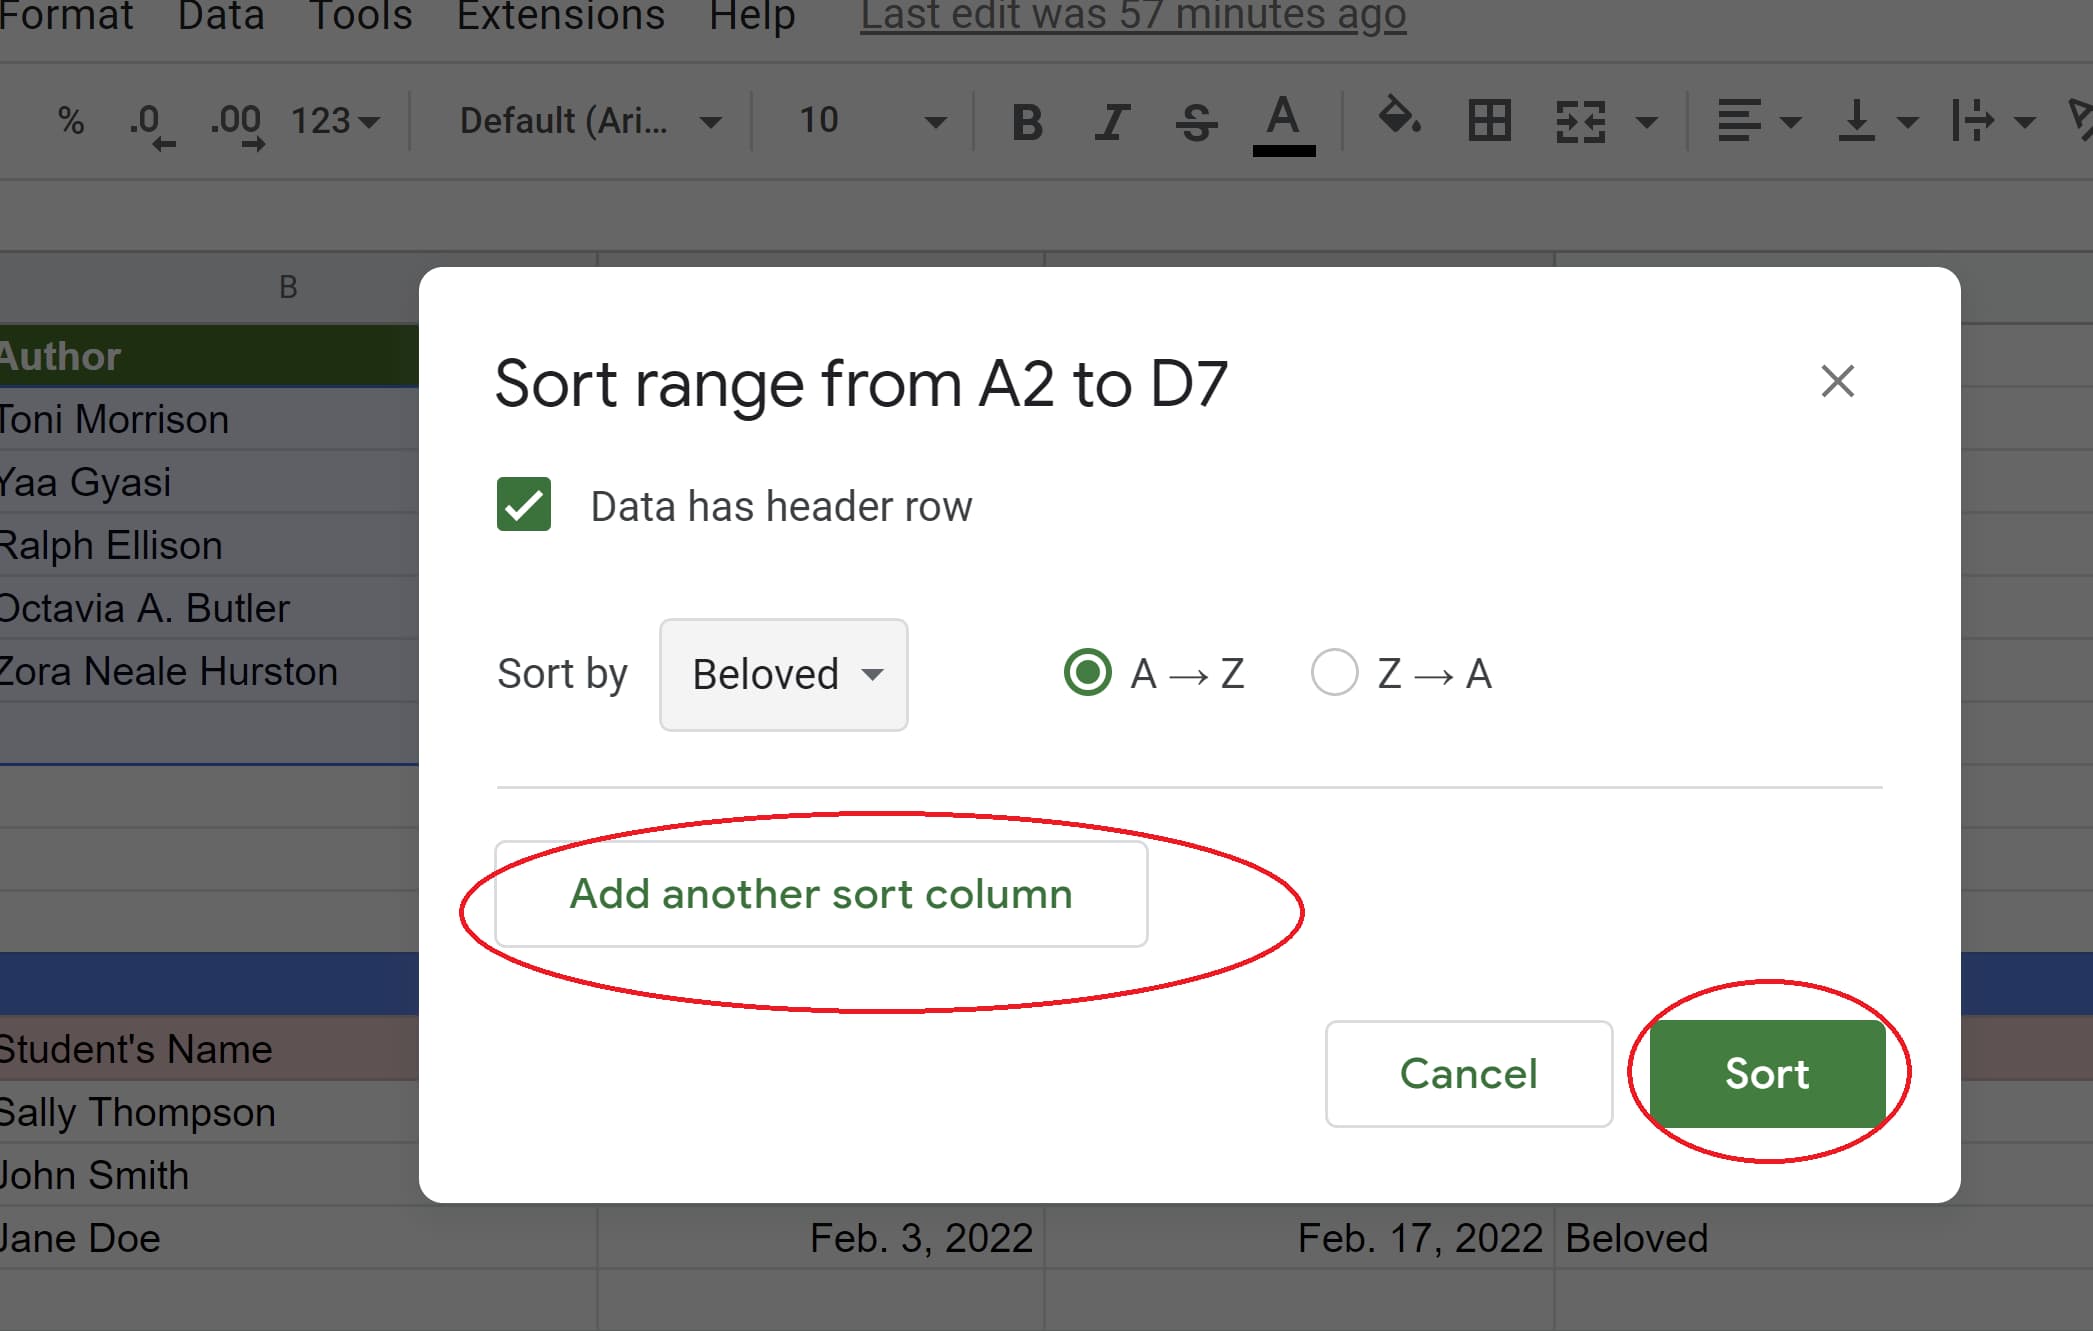 Add another sort column and the Sort button shown in Google Sheets